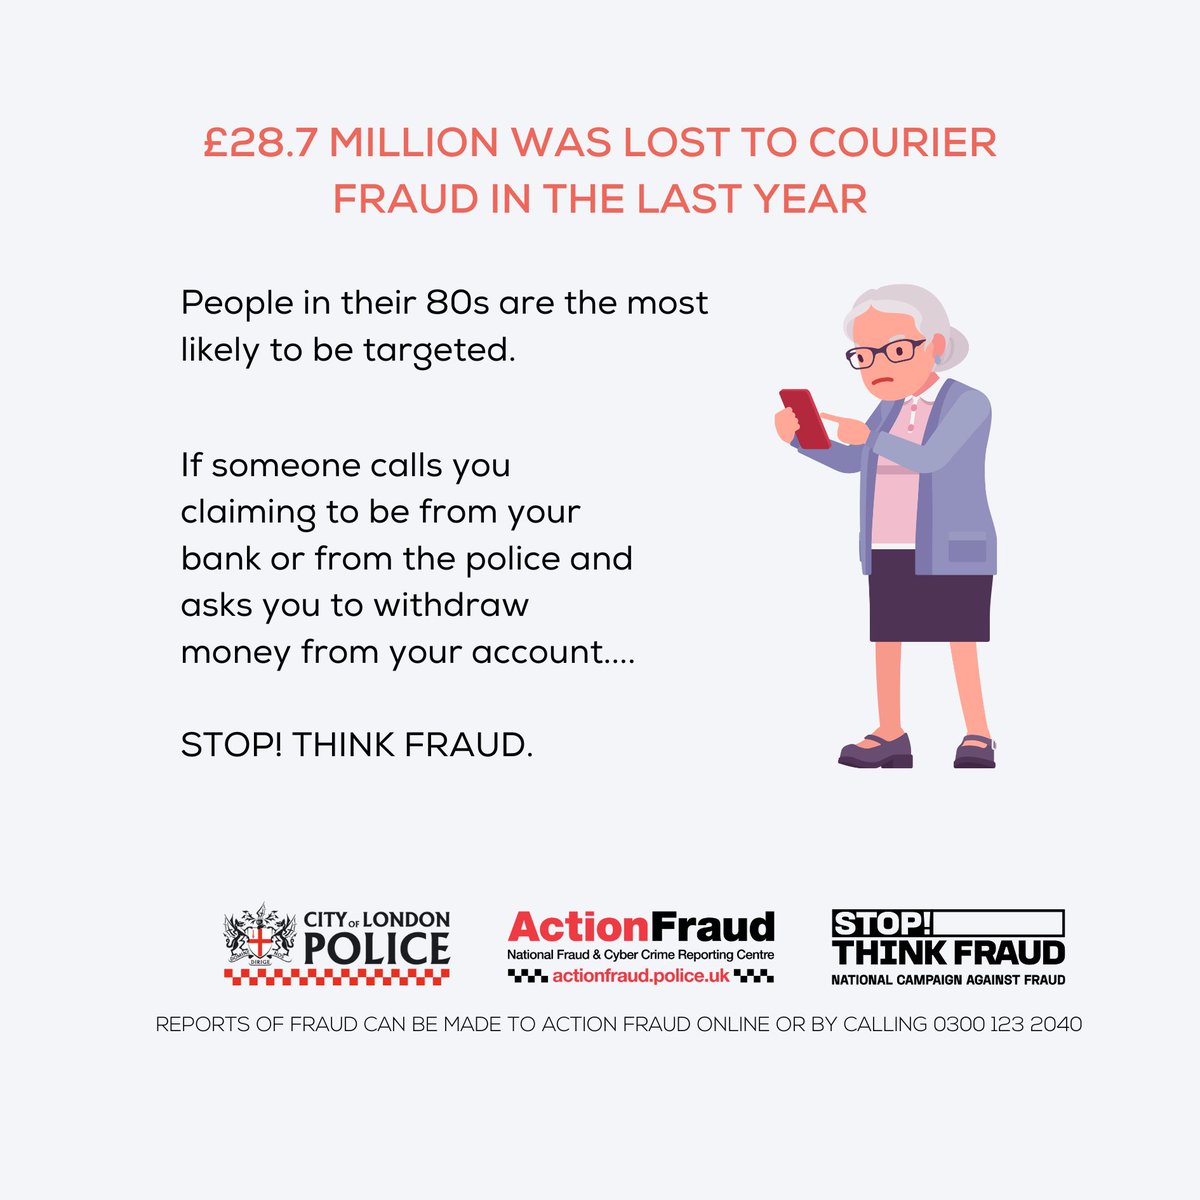 More than £28.7 million was lost to courier fraud in the UK last year, with people in their 80s the most likely to be targeted. Courier fraud criminals will call victims pretending to be from the police or from their bank. You can read more here: bit.ly/3wVwfKj